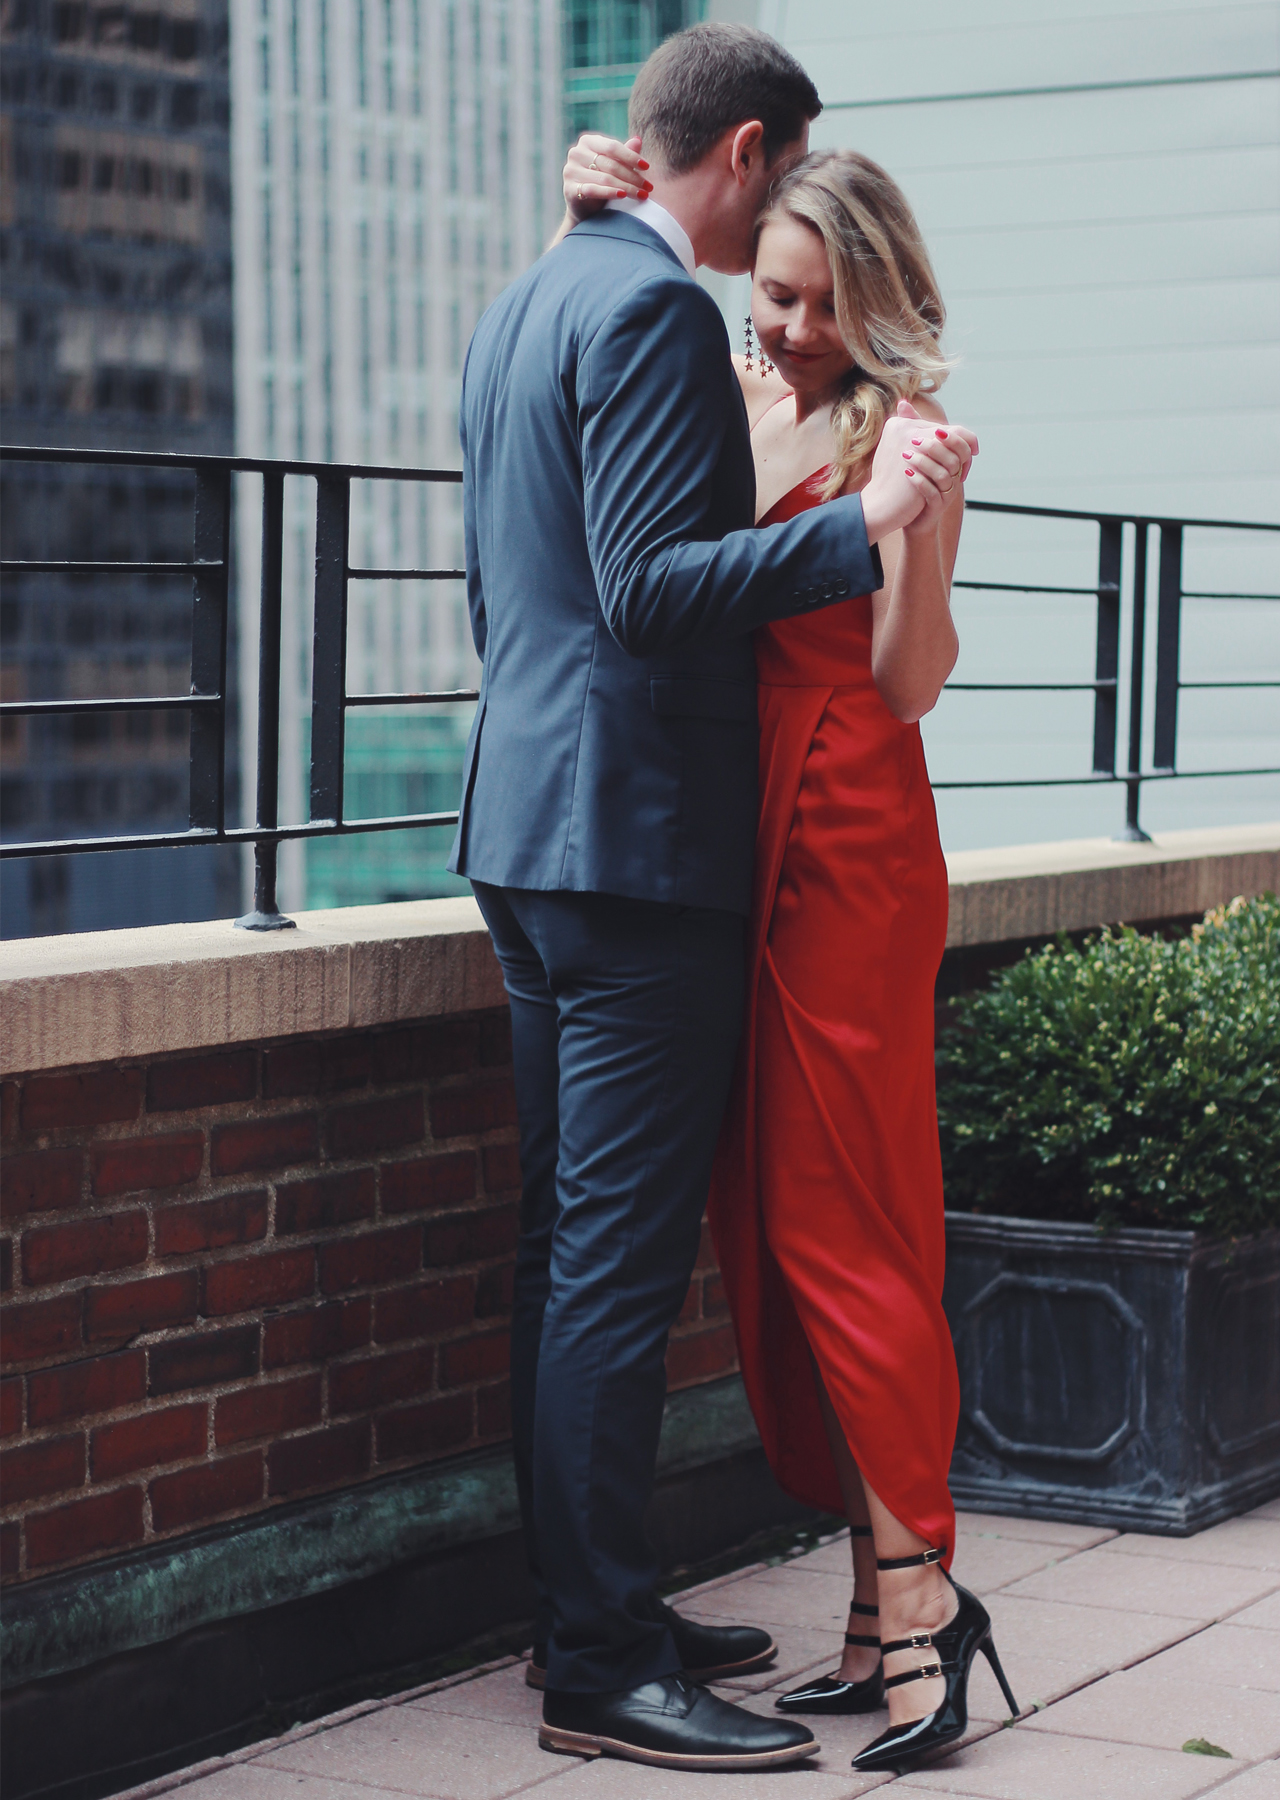 The Steele Maiden: His and Hers Special Occasion Holiday Style - Red Wrap dress and navy blue suit